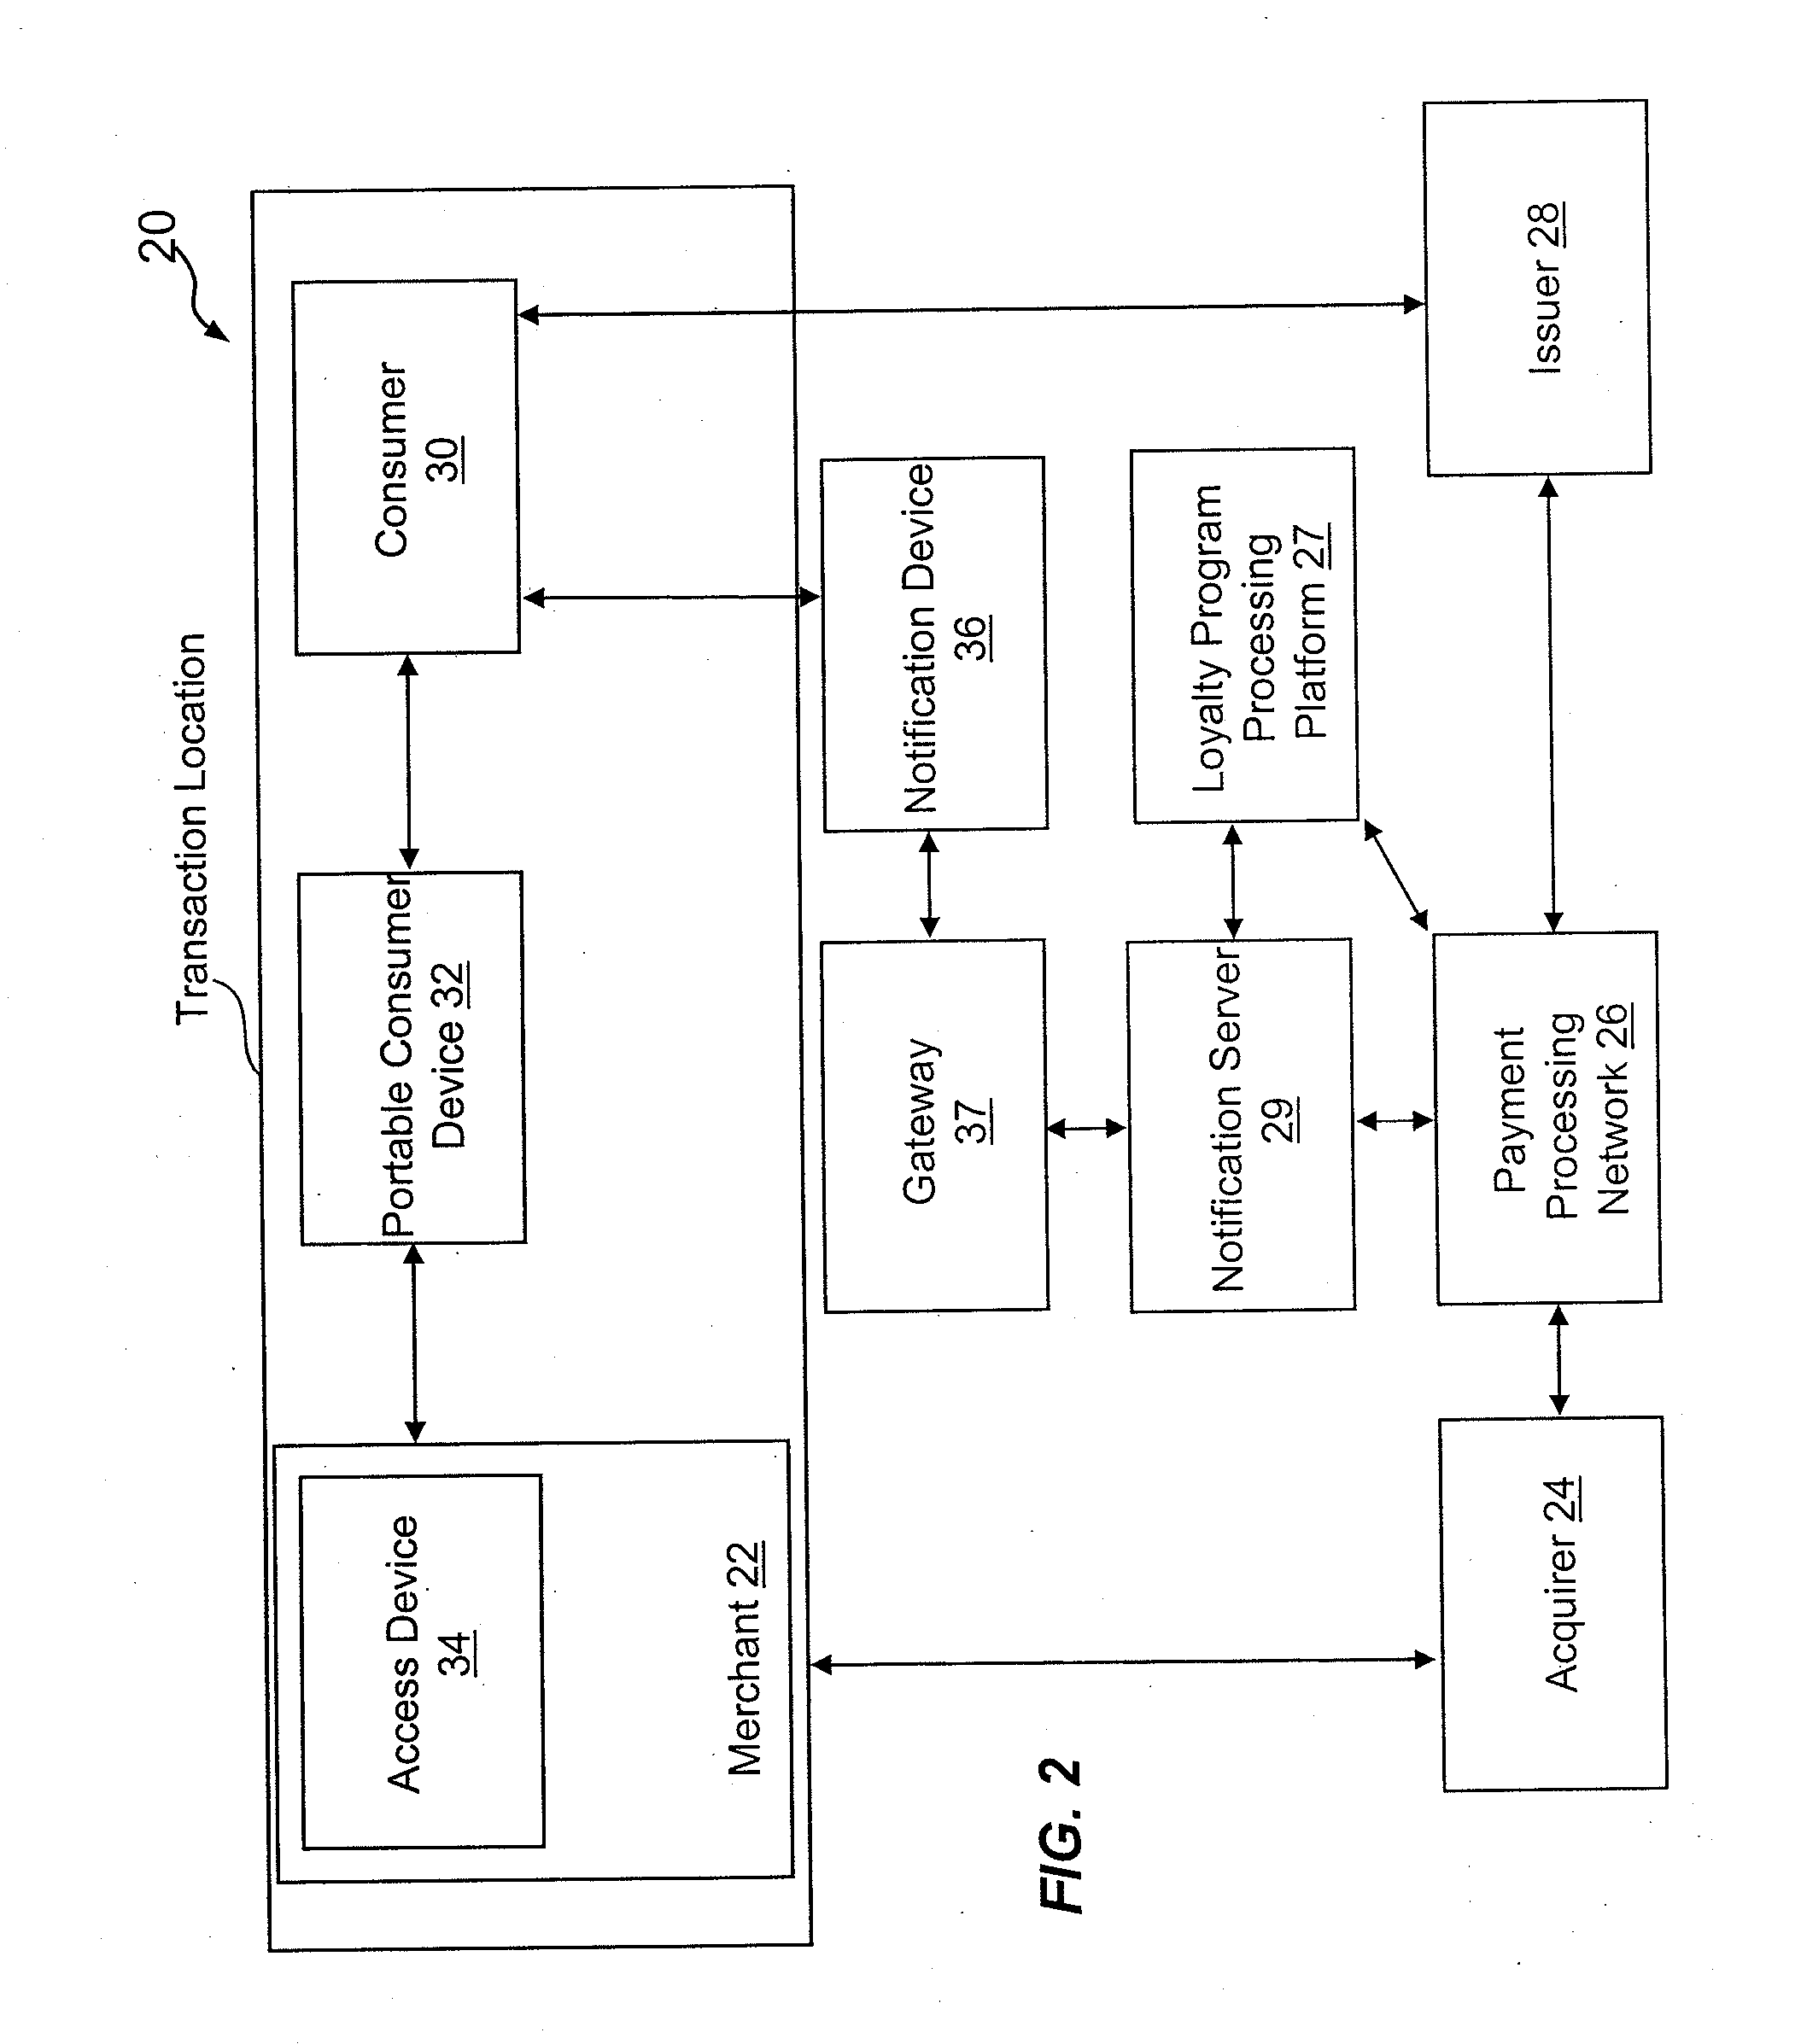 System and method for benefit notification